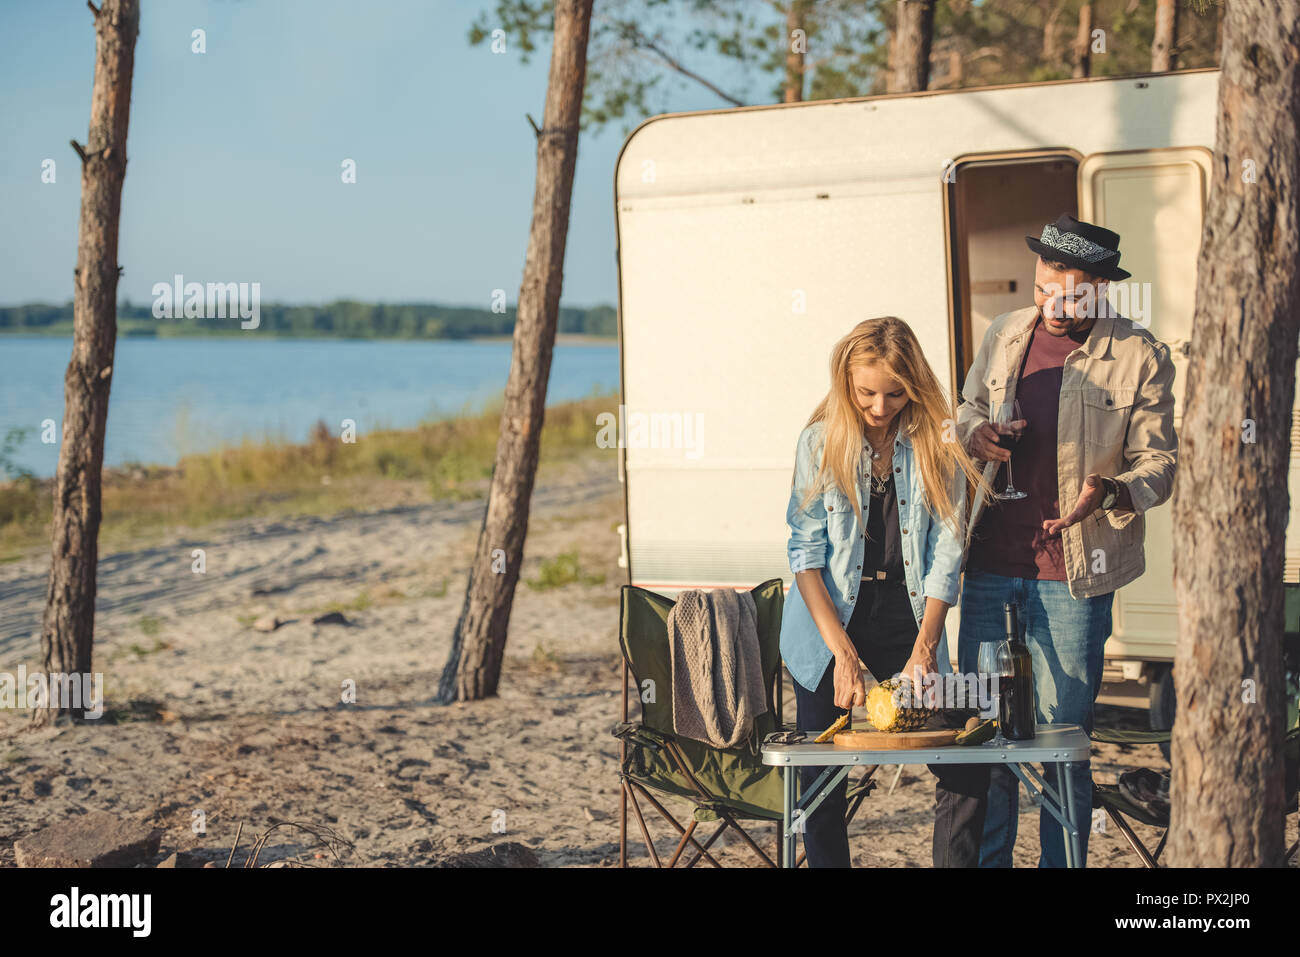 young woman cutting pineapple while man with glass of wine talking to her near trailer Stock Photo